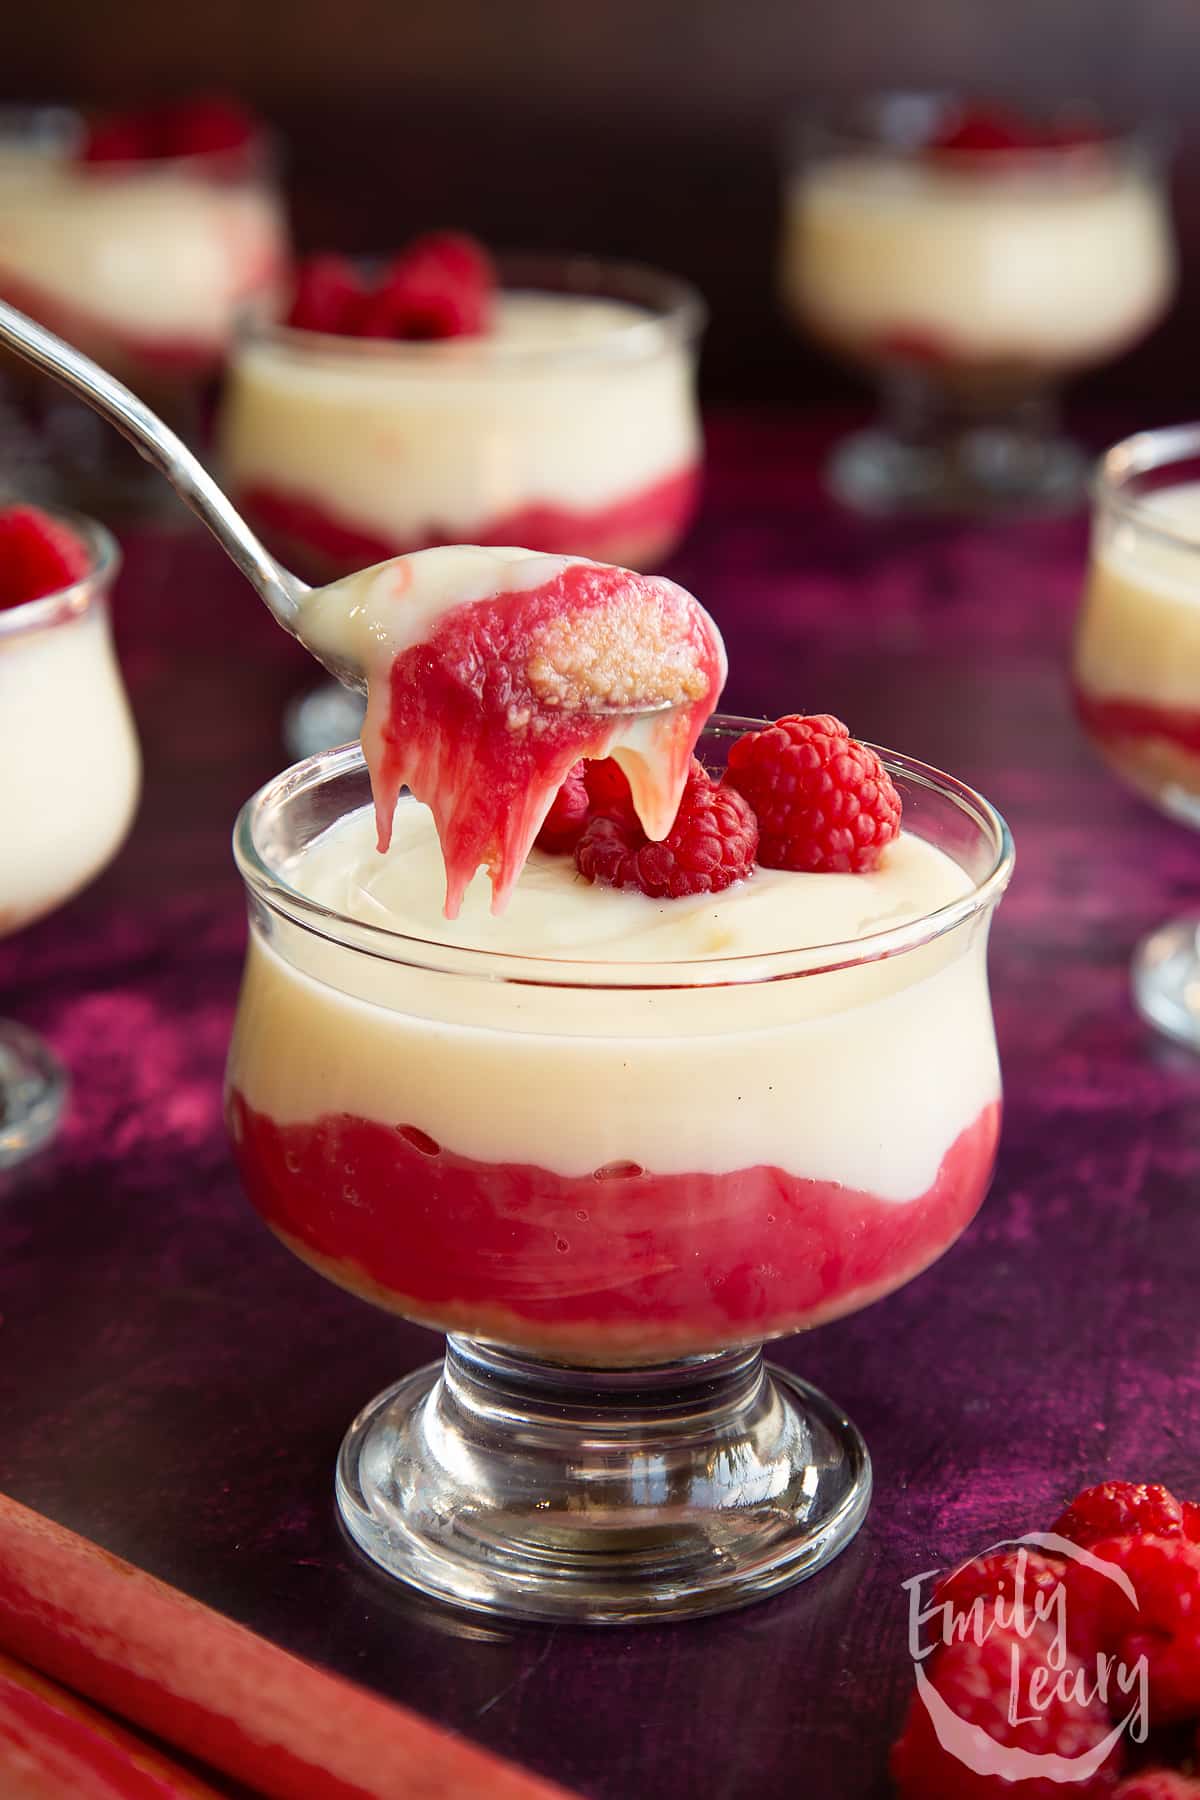 Rhubarb and custard pudding in a glass dish topped with raspberries with a spoonful on show.